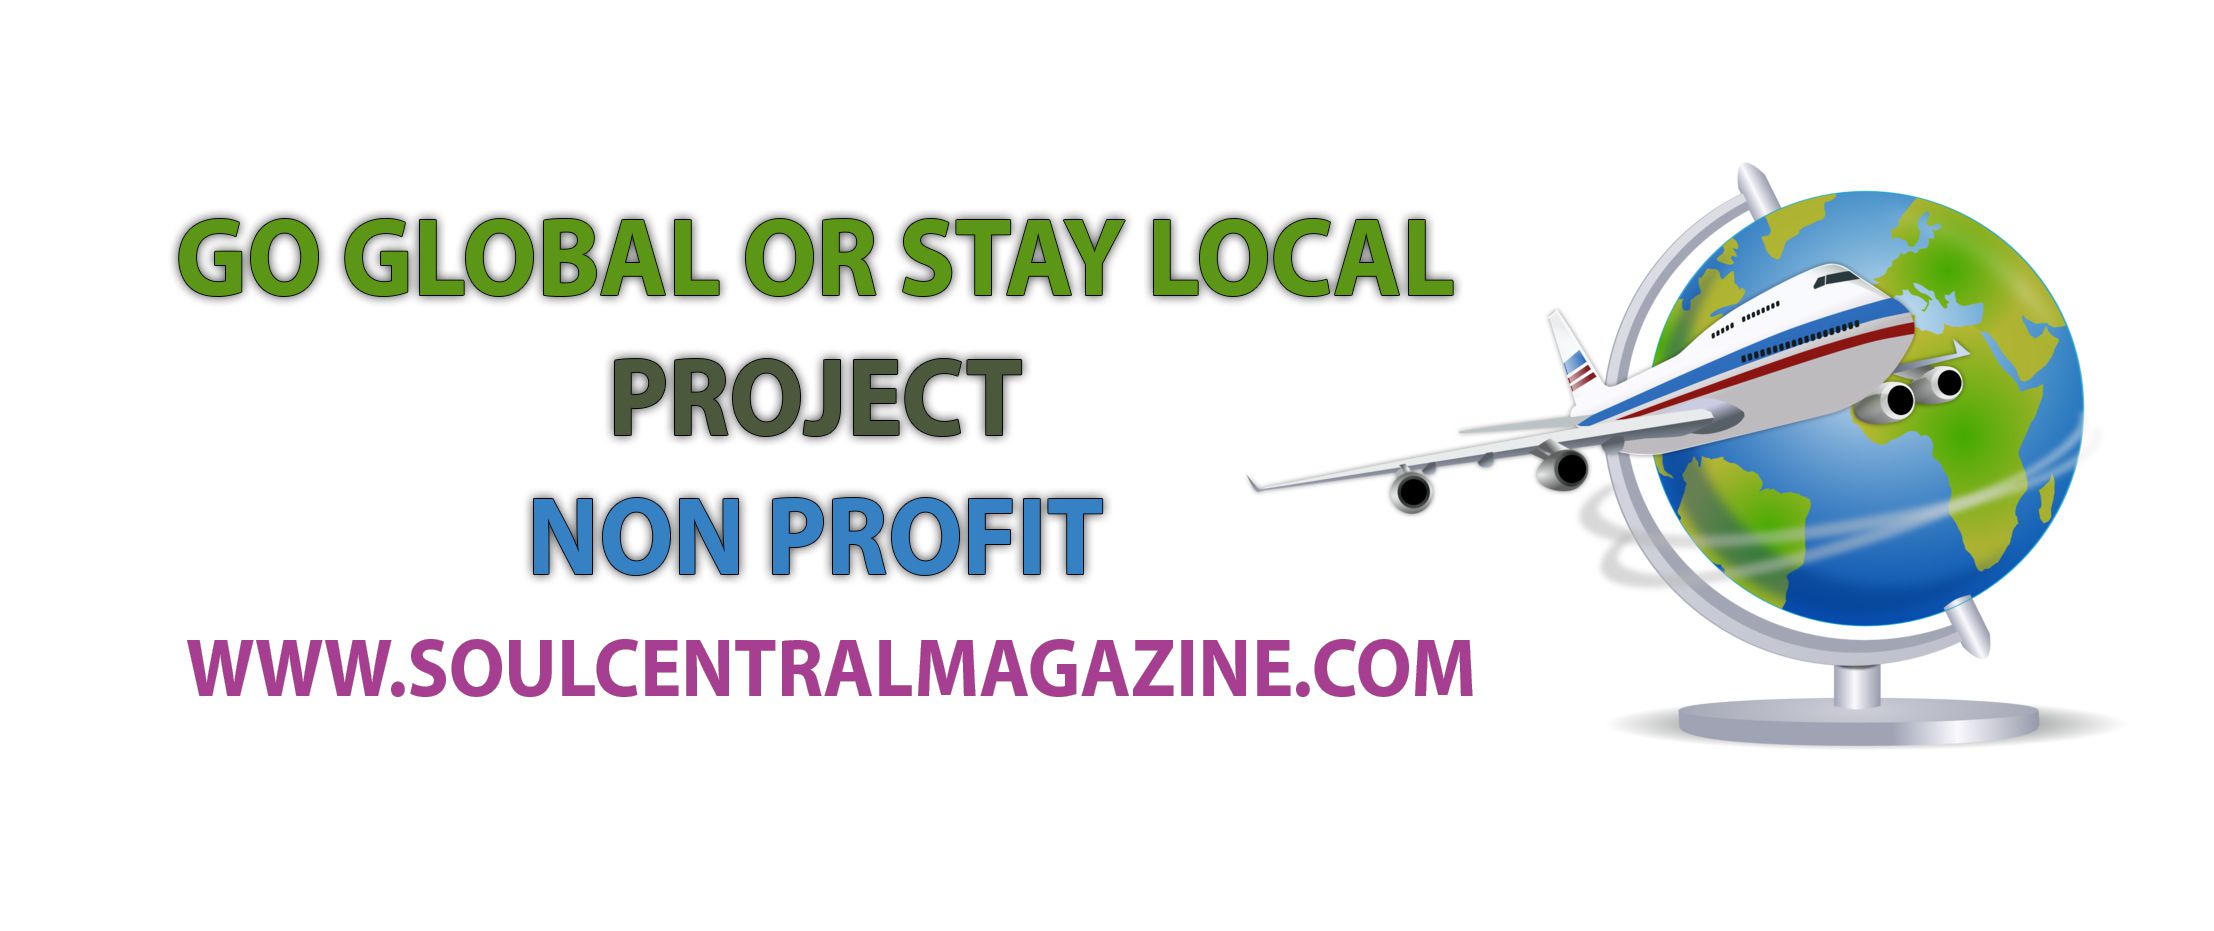 Go Global or Stay Local Project - NON PROFIT